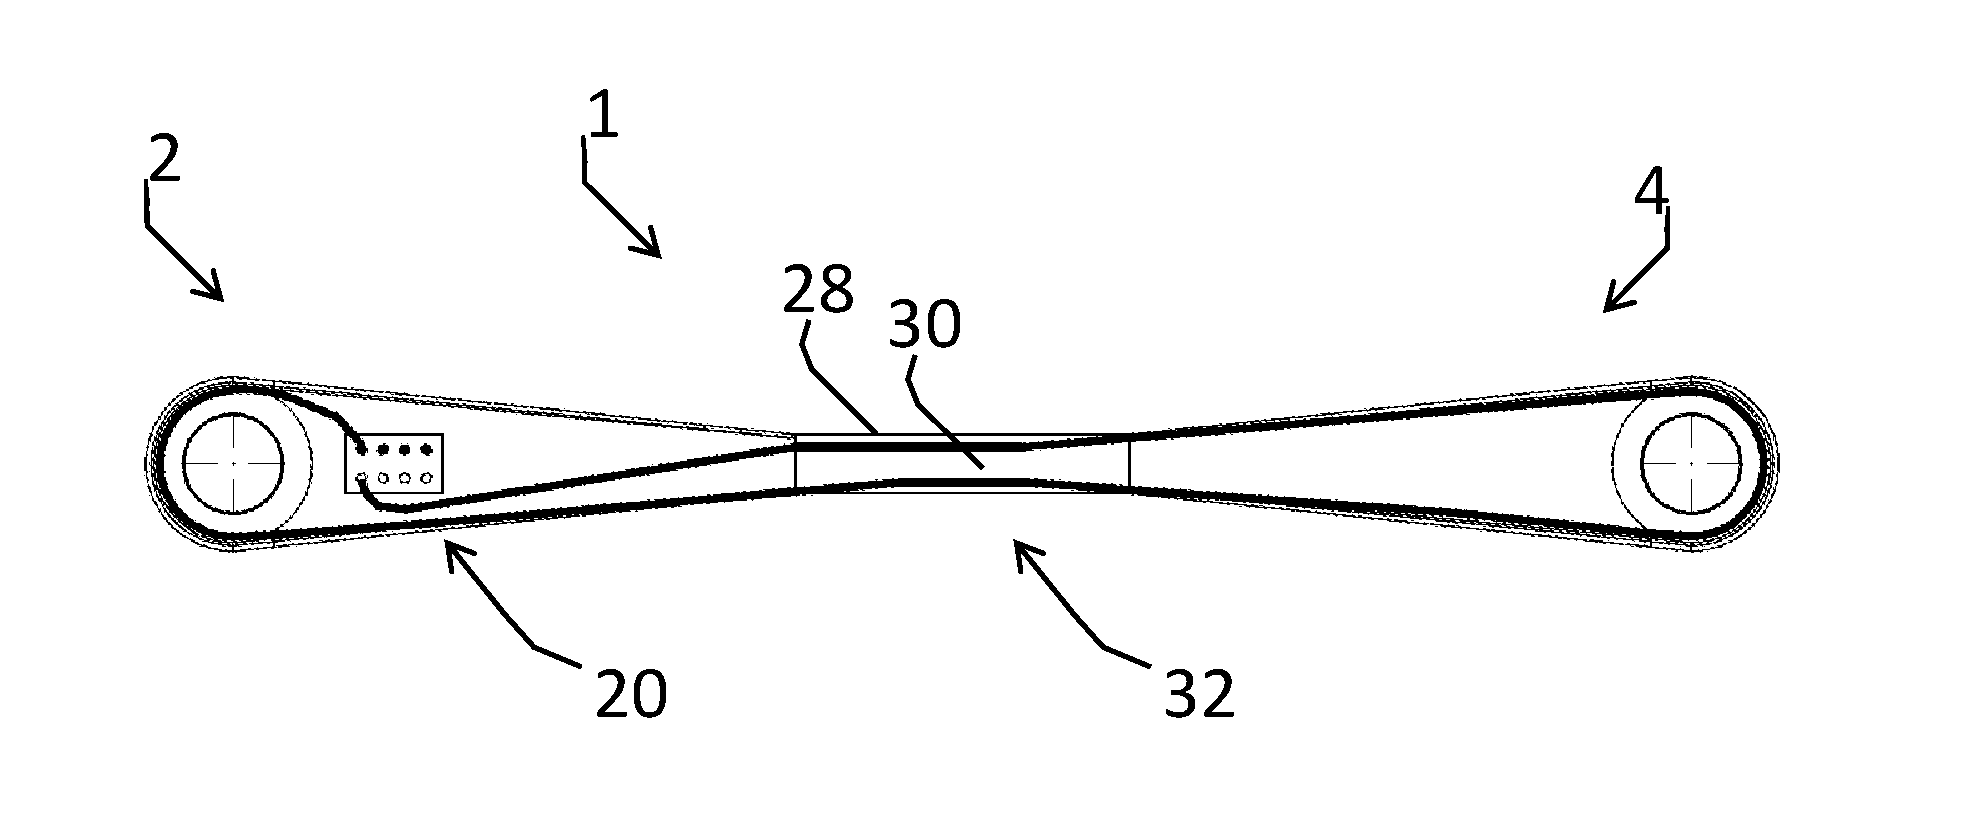 Cable and method for monitoring a cable